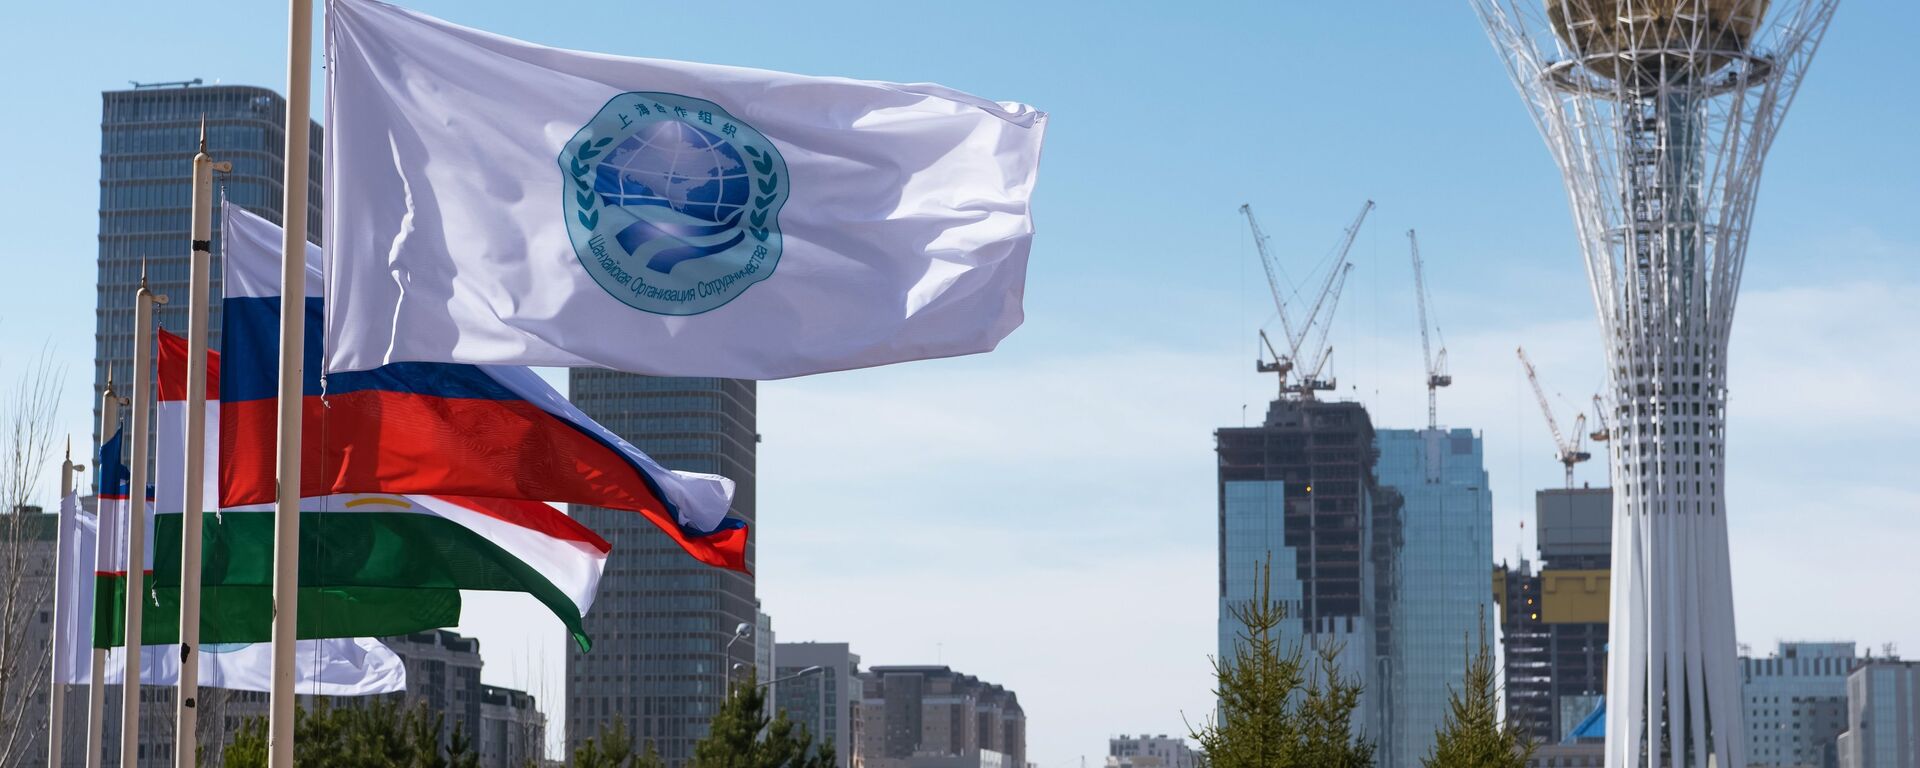 The flag of the Shanghai Cooperation Organization and flags of the SCO member states in Astana - Sputnik International, 1920, 01.11.2021